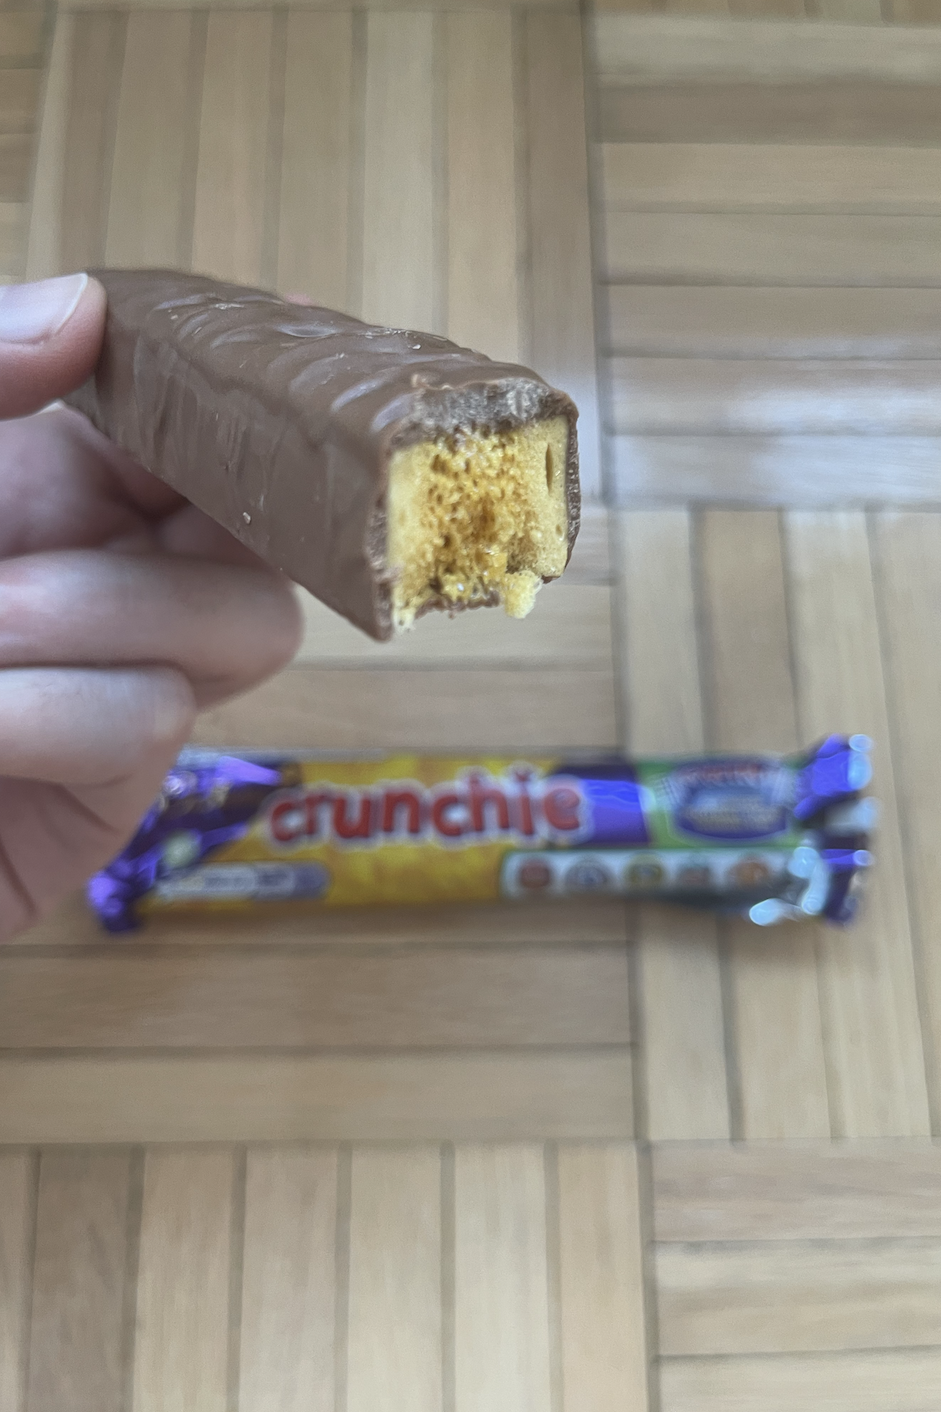 A person holding a bitten Crunchie chocolate bar with another unopened one in the background